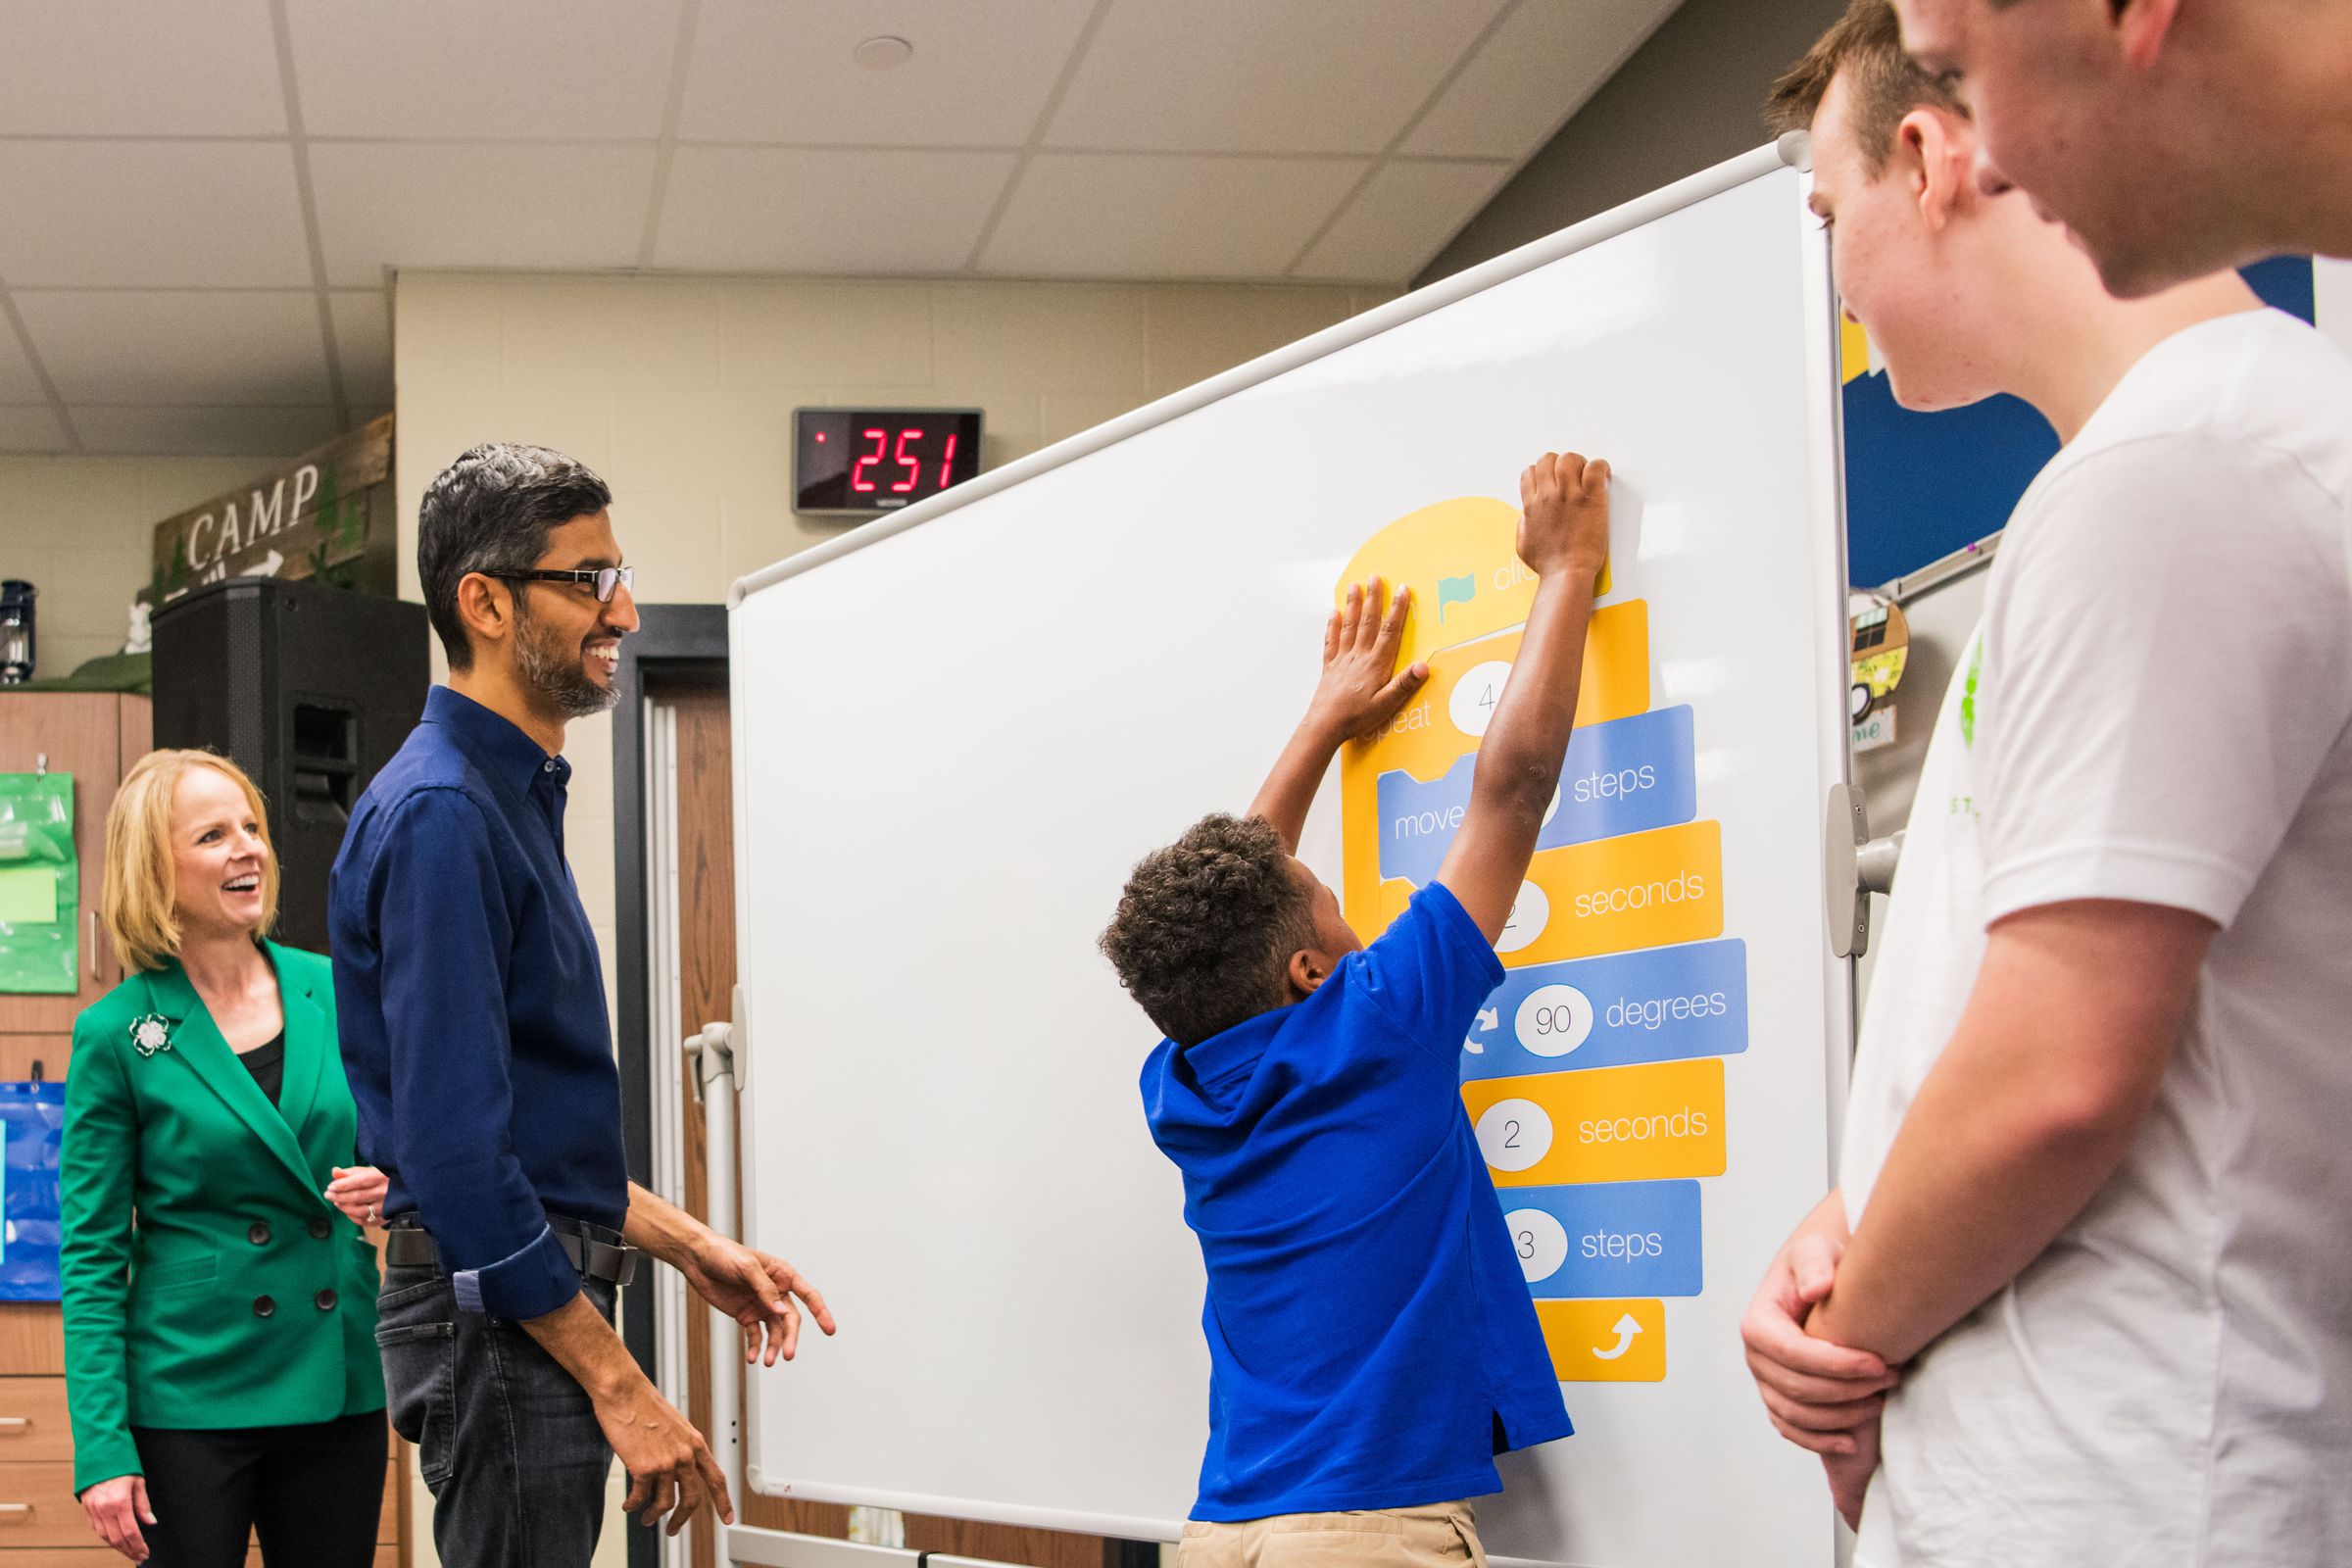 In a classroom, Sundar Pichai and Jennifer Sirangelo watch students place stickers on a whiteboard.